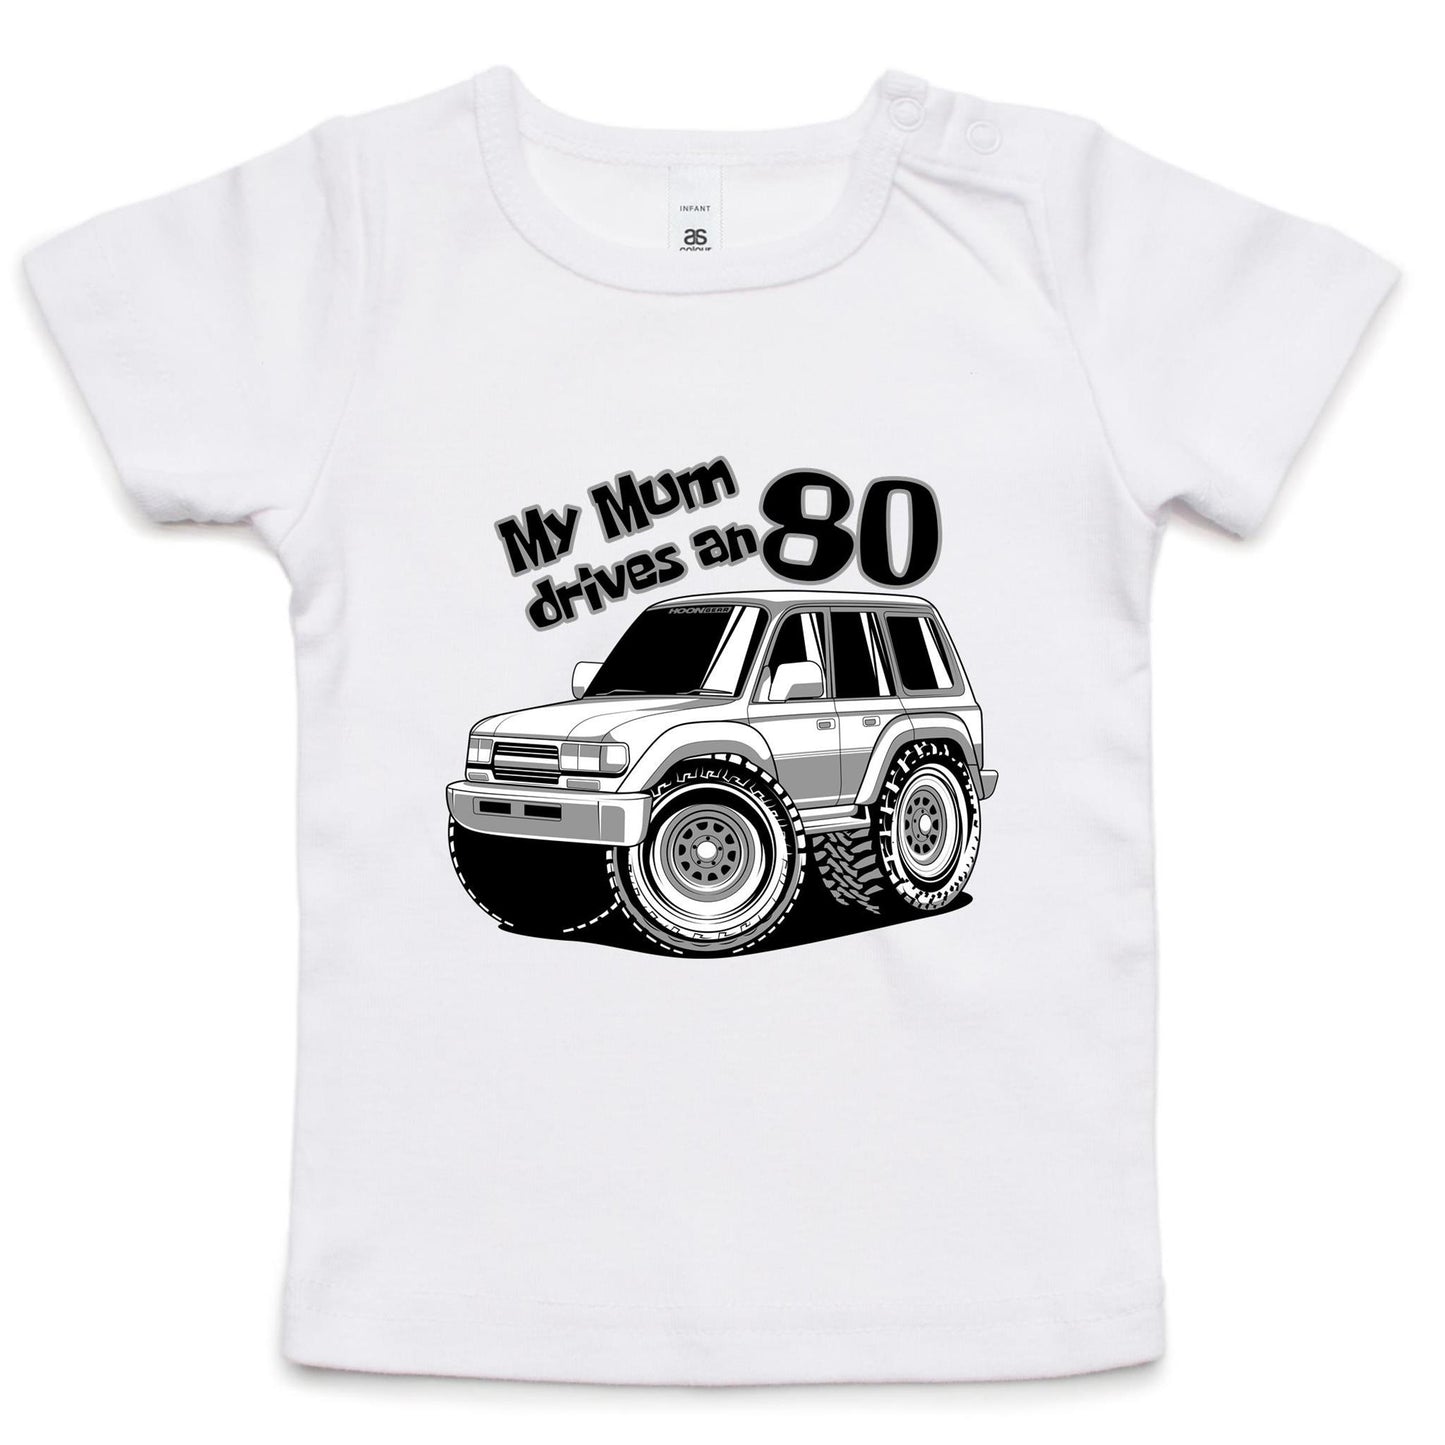 My Dad/Mum drives and 80 - Infant Wee Tee